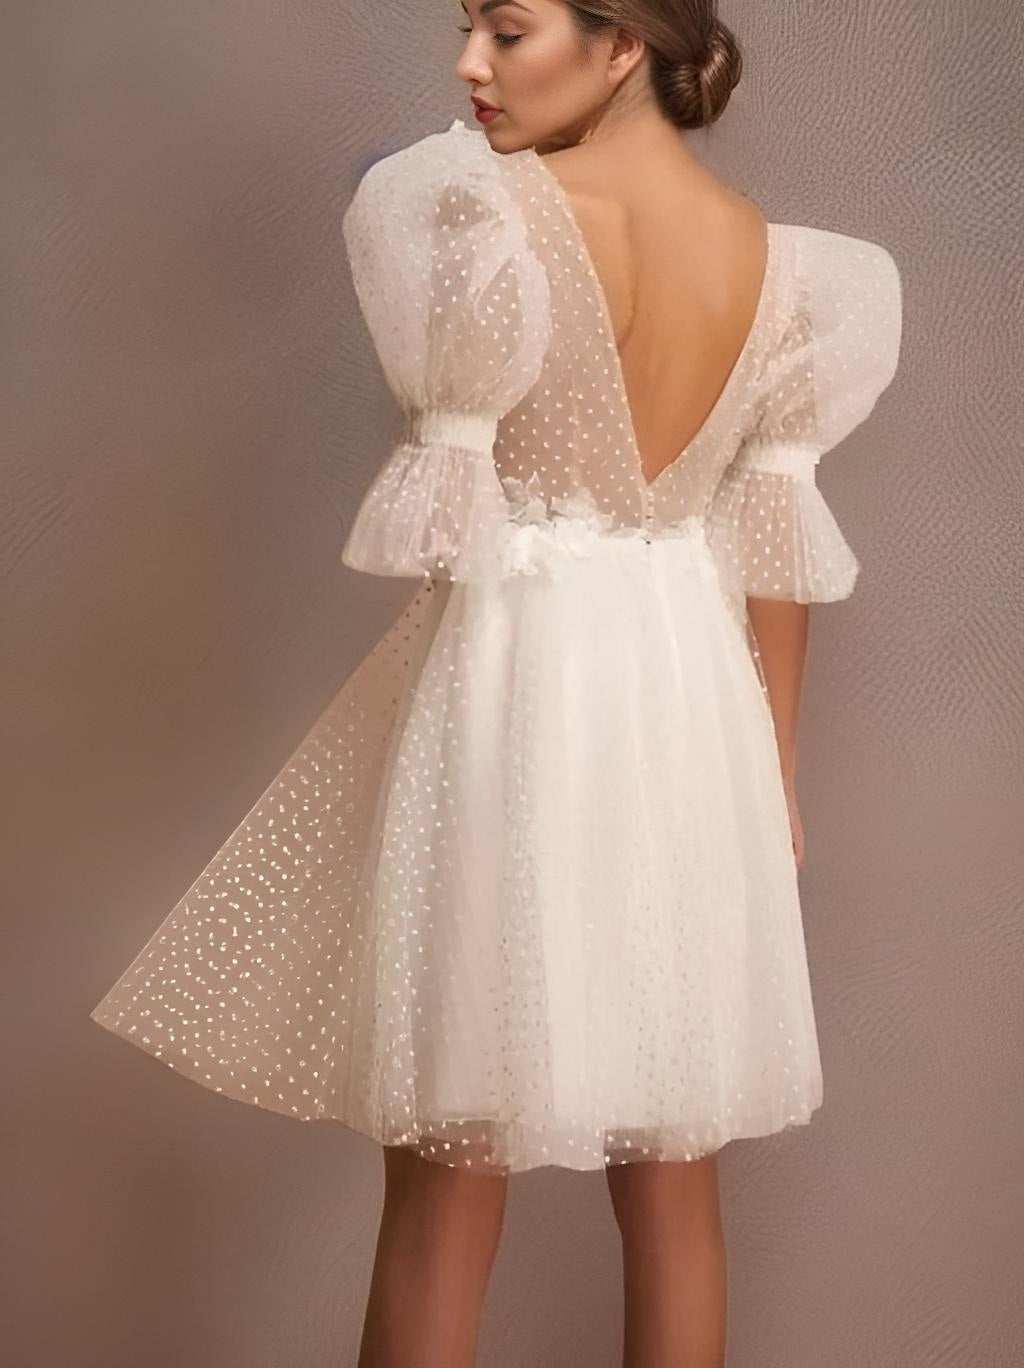 Bride from back in backless Alora Short Wedding Dress with Dotted Tulle Skirt